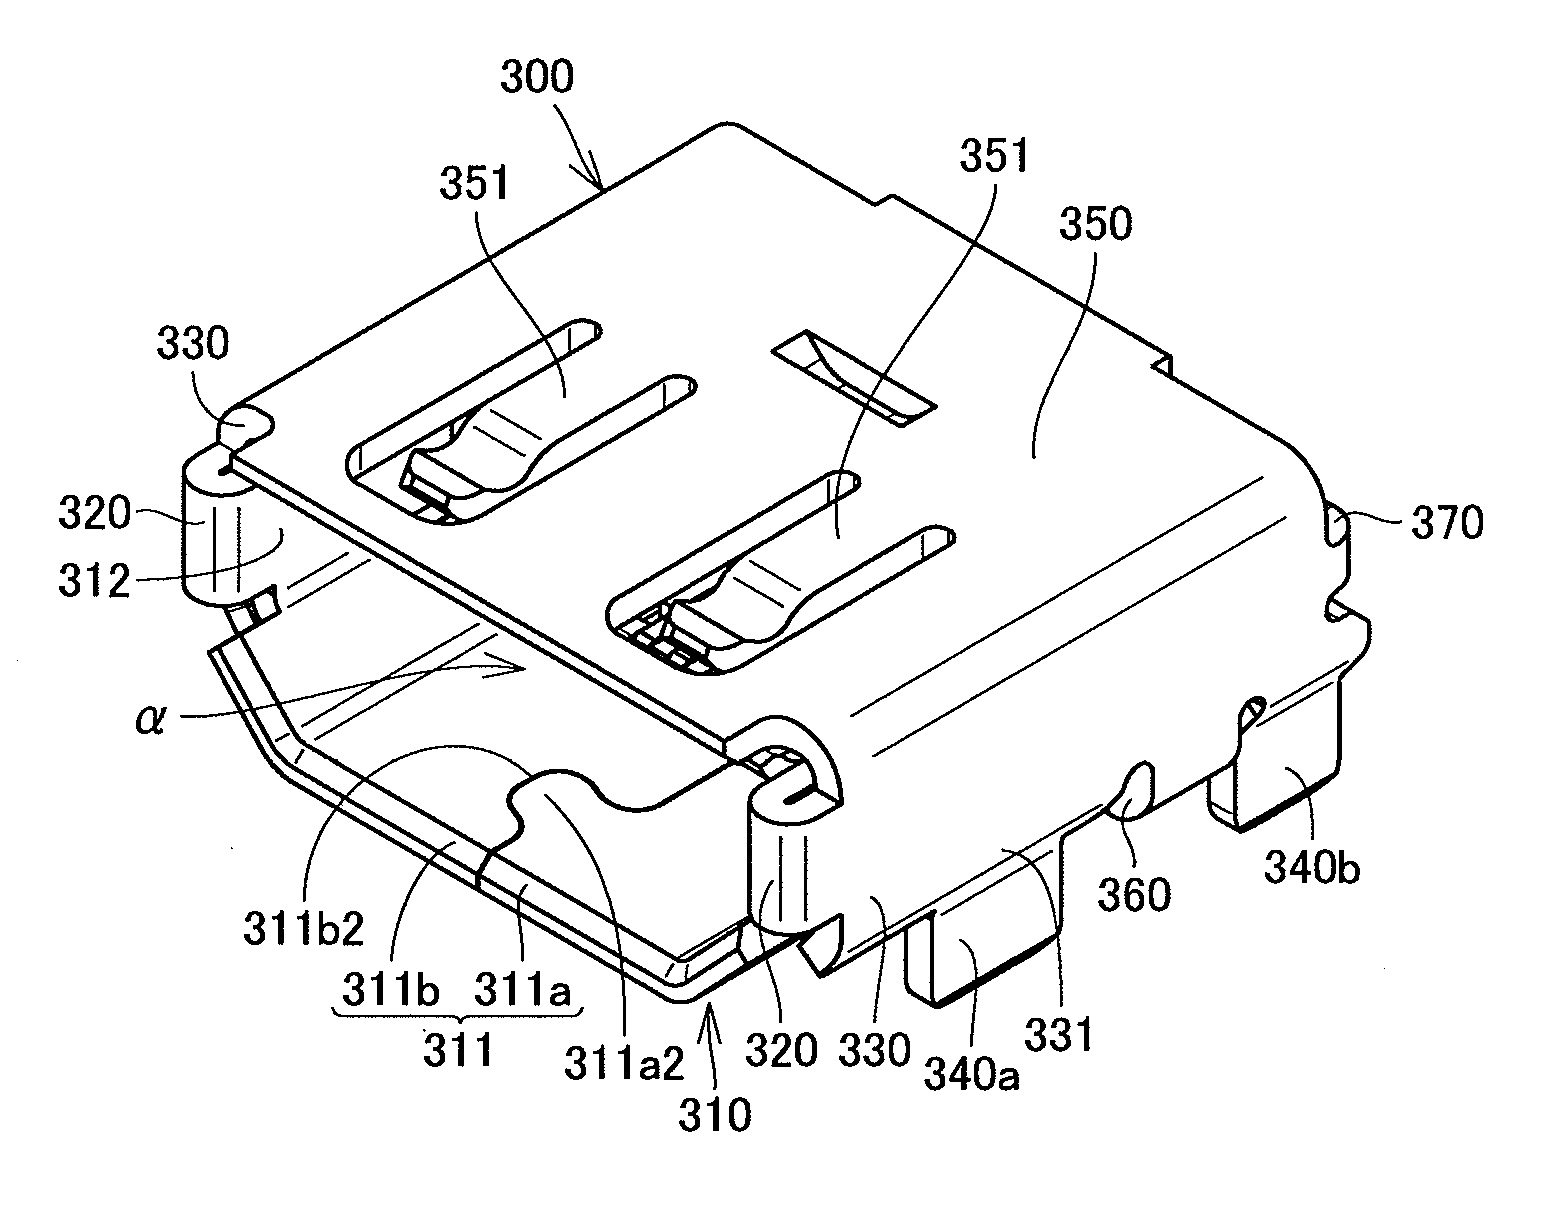 Shield case, receptacle connector, and electronic equipment